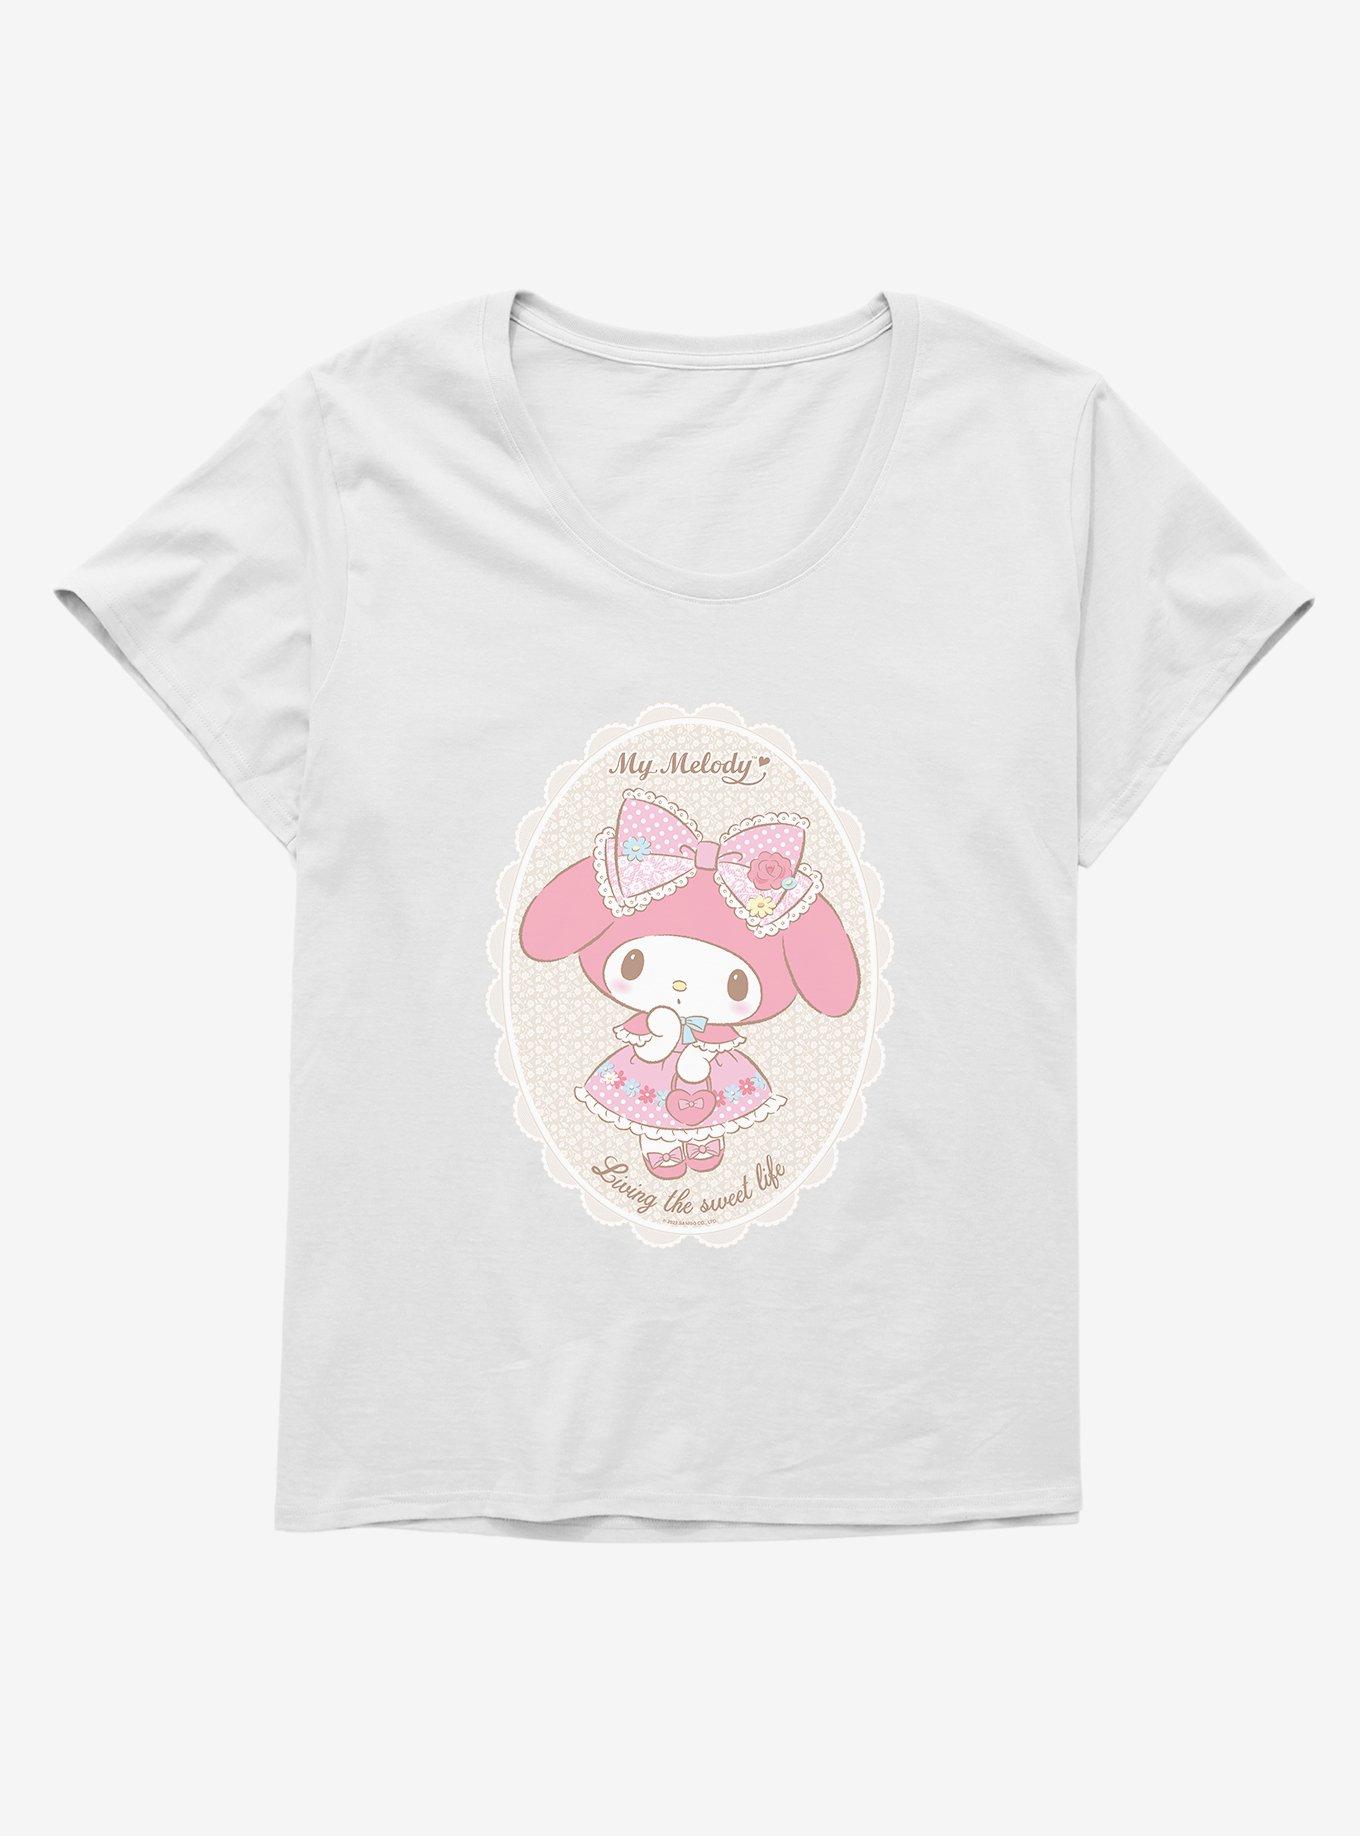 My Melody Living The Sweet Life Girls T-Shirt Plus Size, WHITE, hi-res